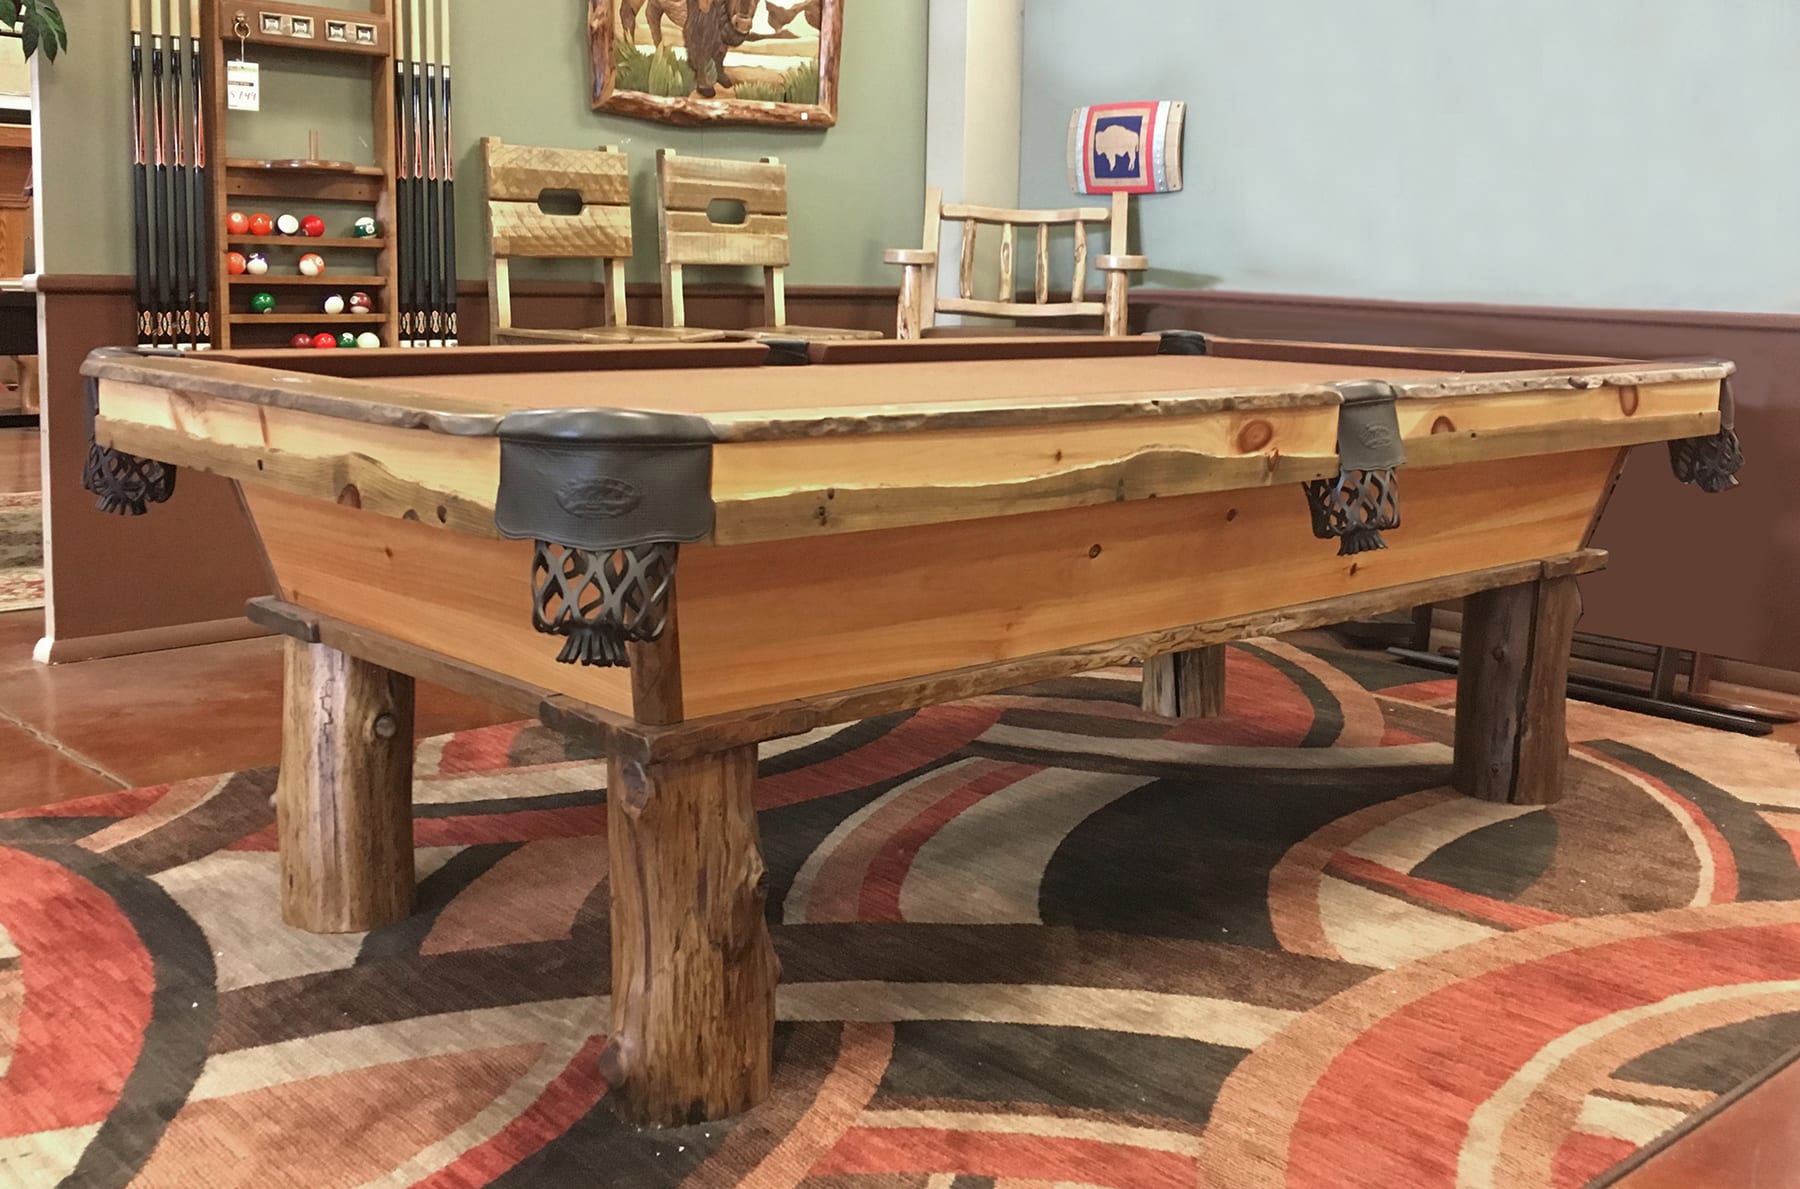 Invest In a Billiard Table at Home – Pool Tables for Sale Lake Tahoe